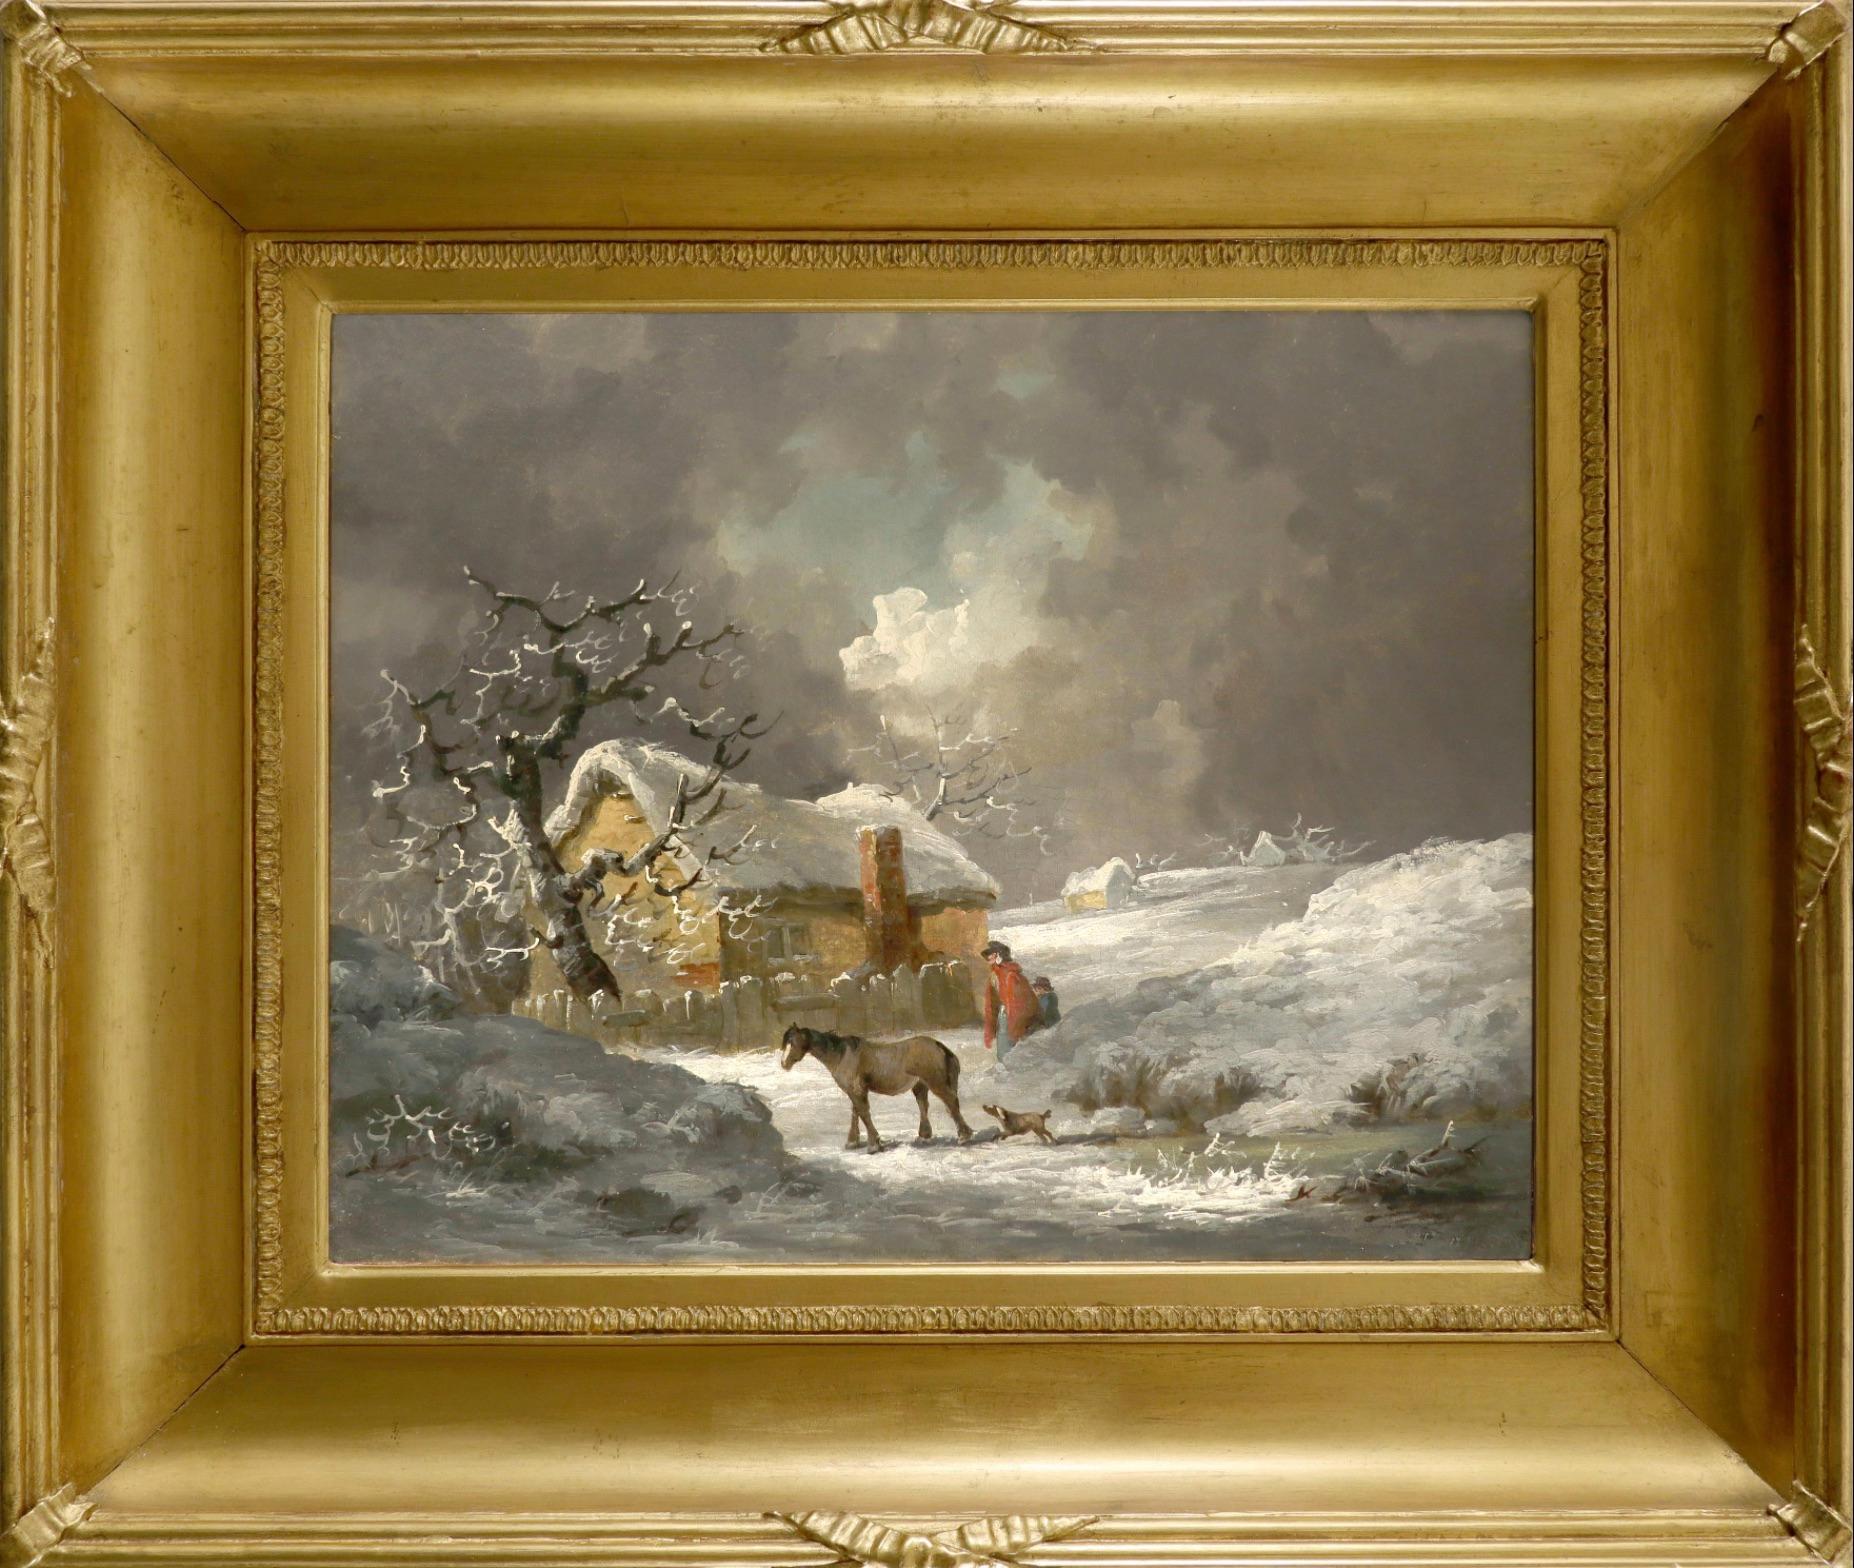 Thomas Hand Landscape Painting - 'Winter' - A Horse and figures passing a cottage, in a snowy landscape